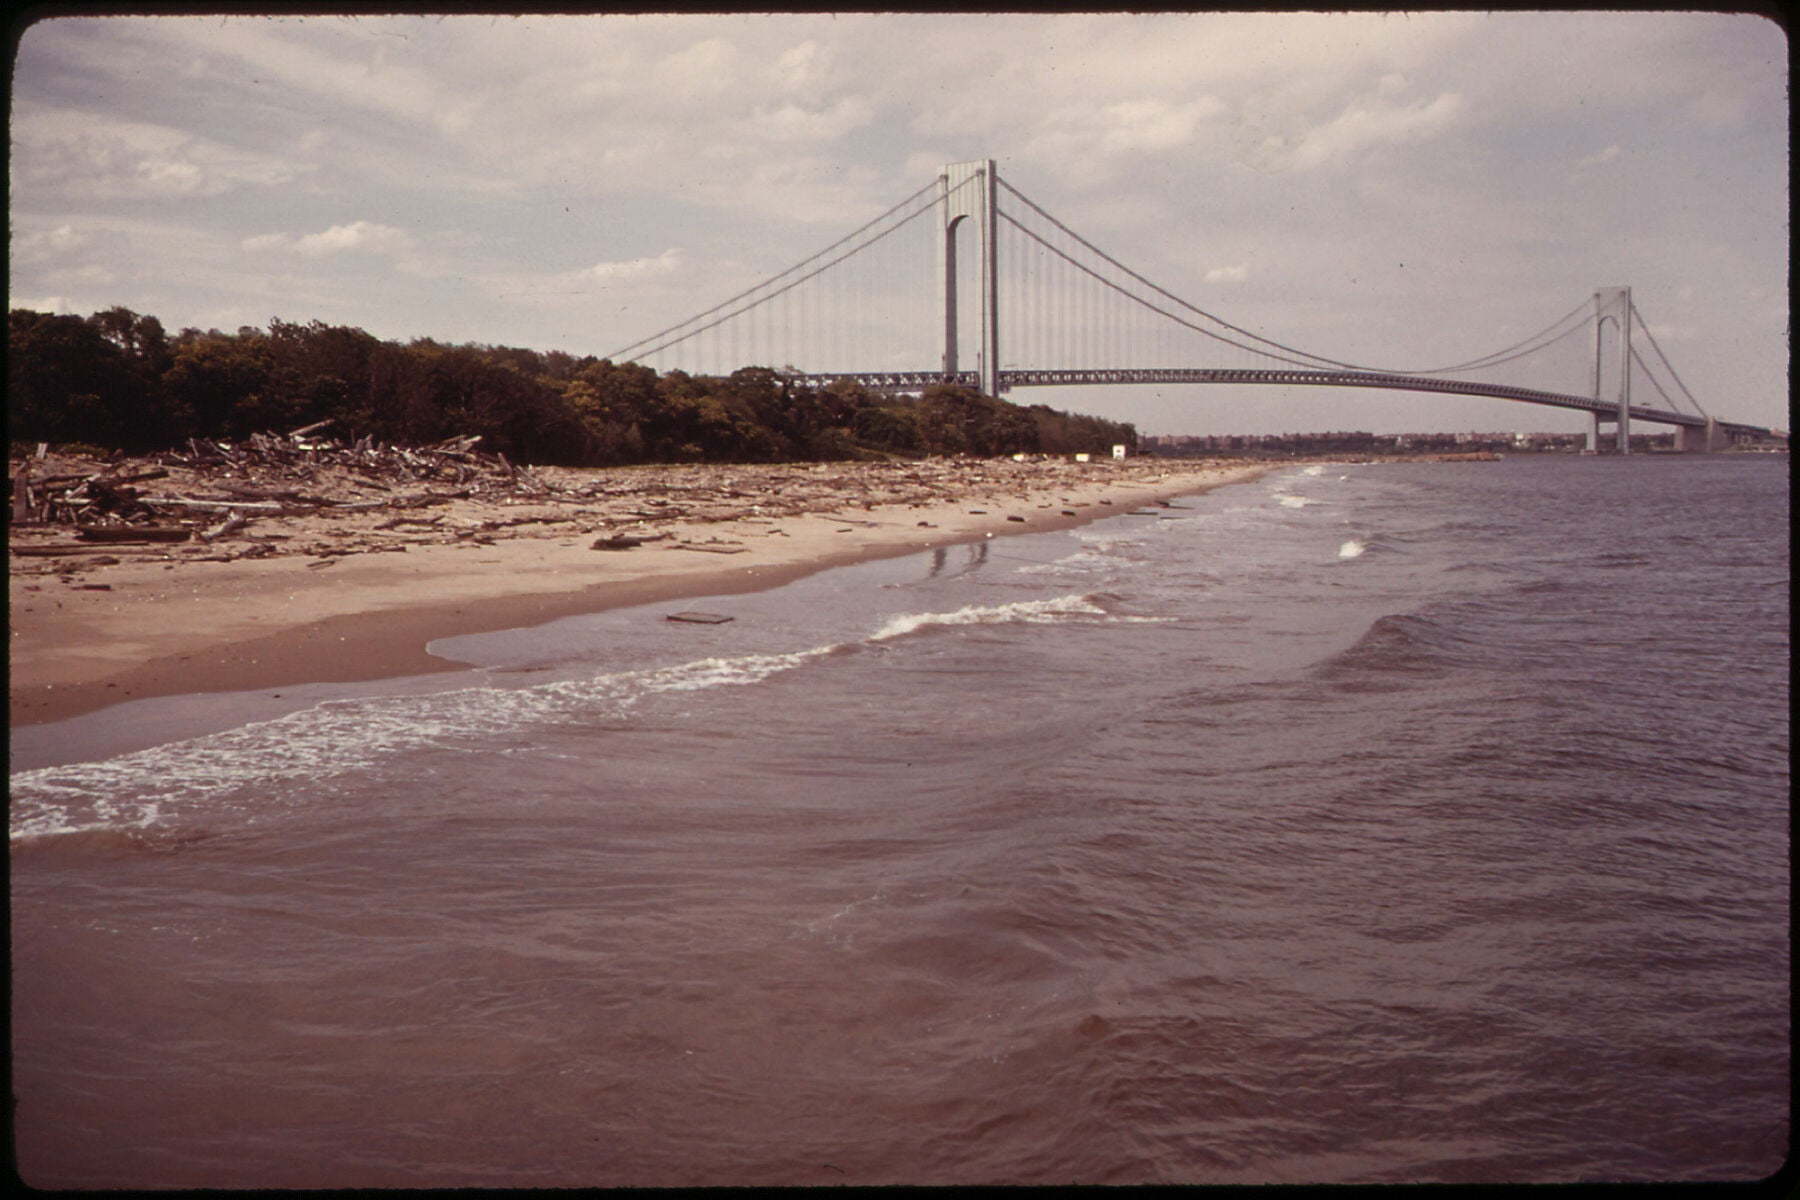 The Verrazano-Narrows Bridge Crosses New York Bay and Connects Staten Island and Brooklyn by Arthur Tress - 1973